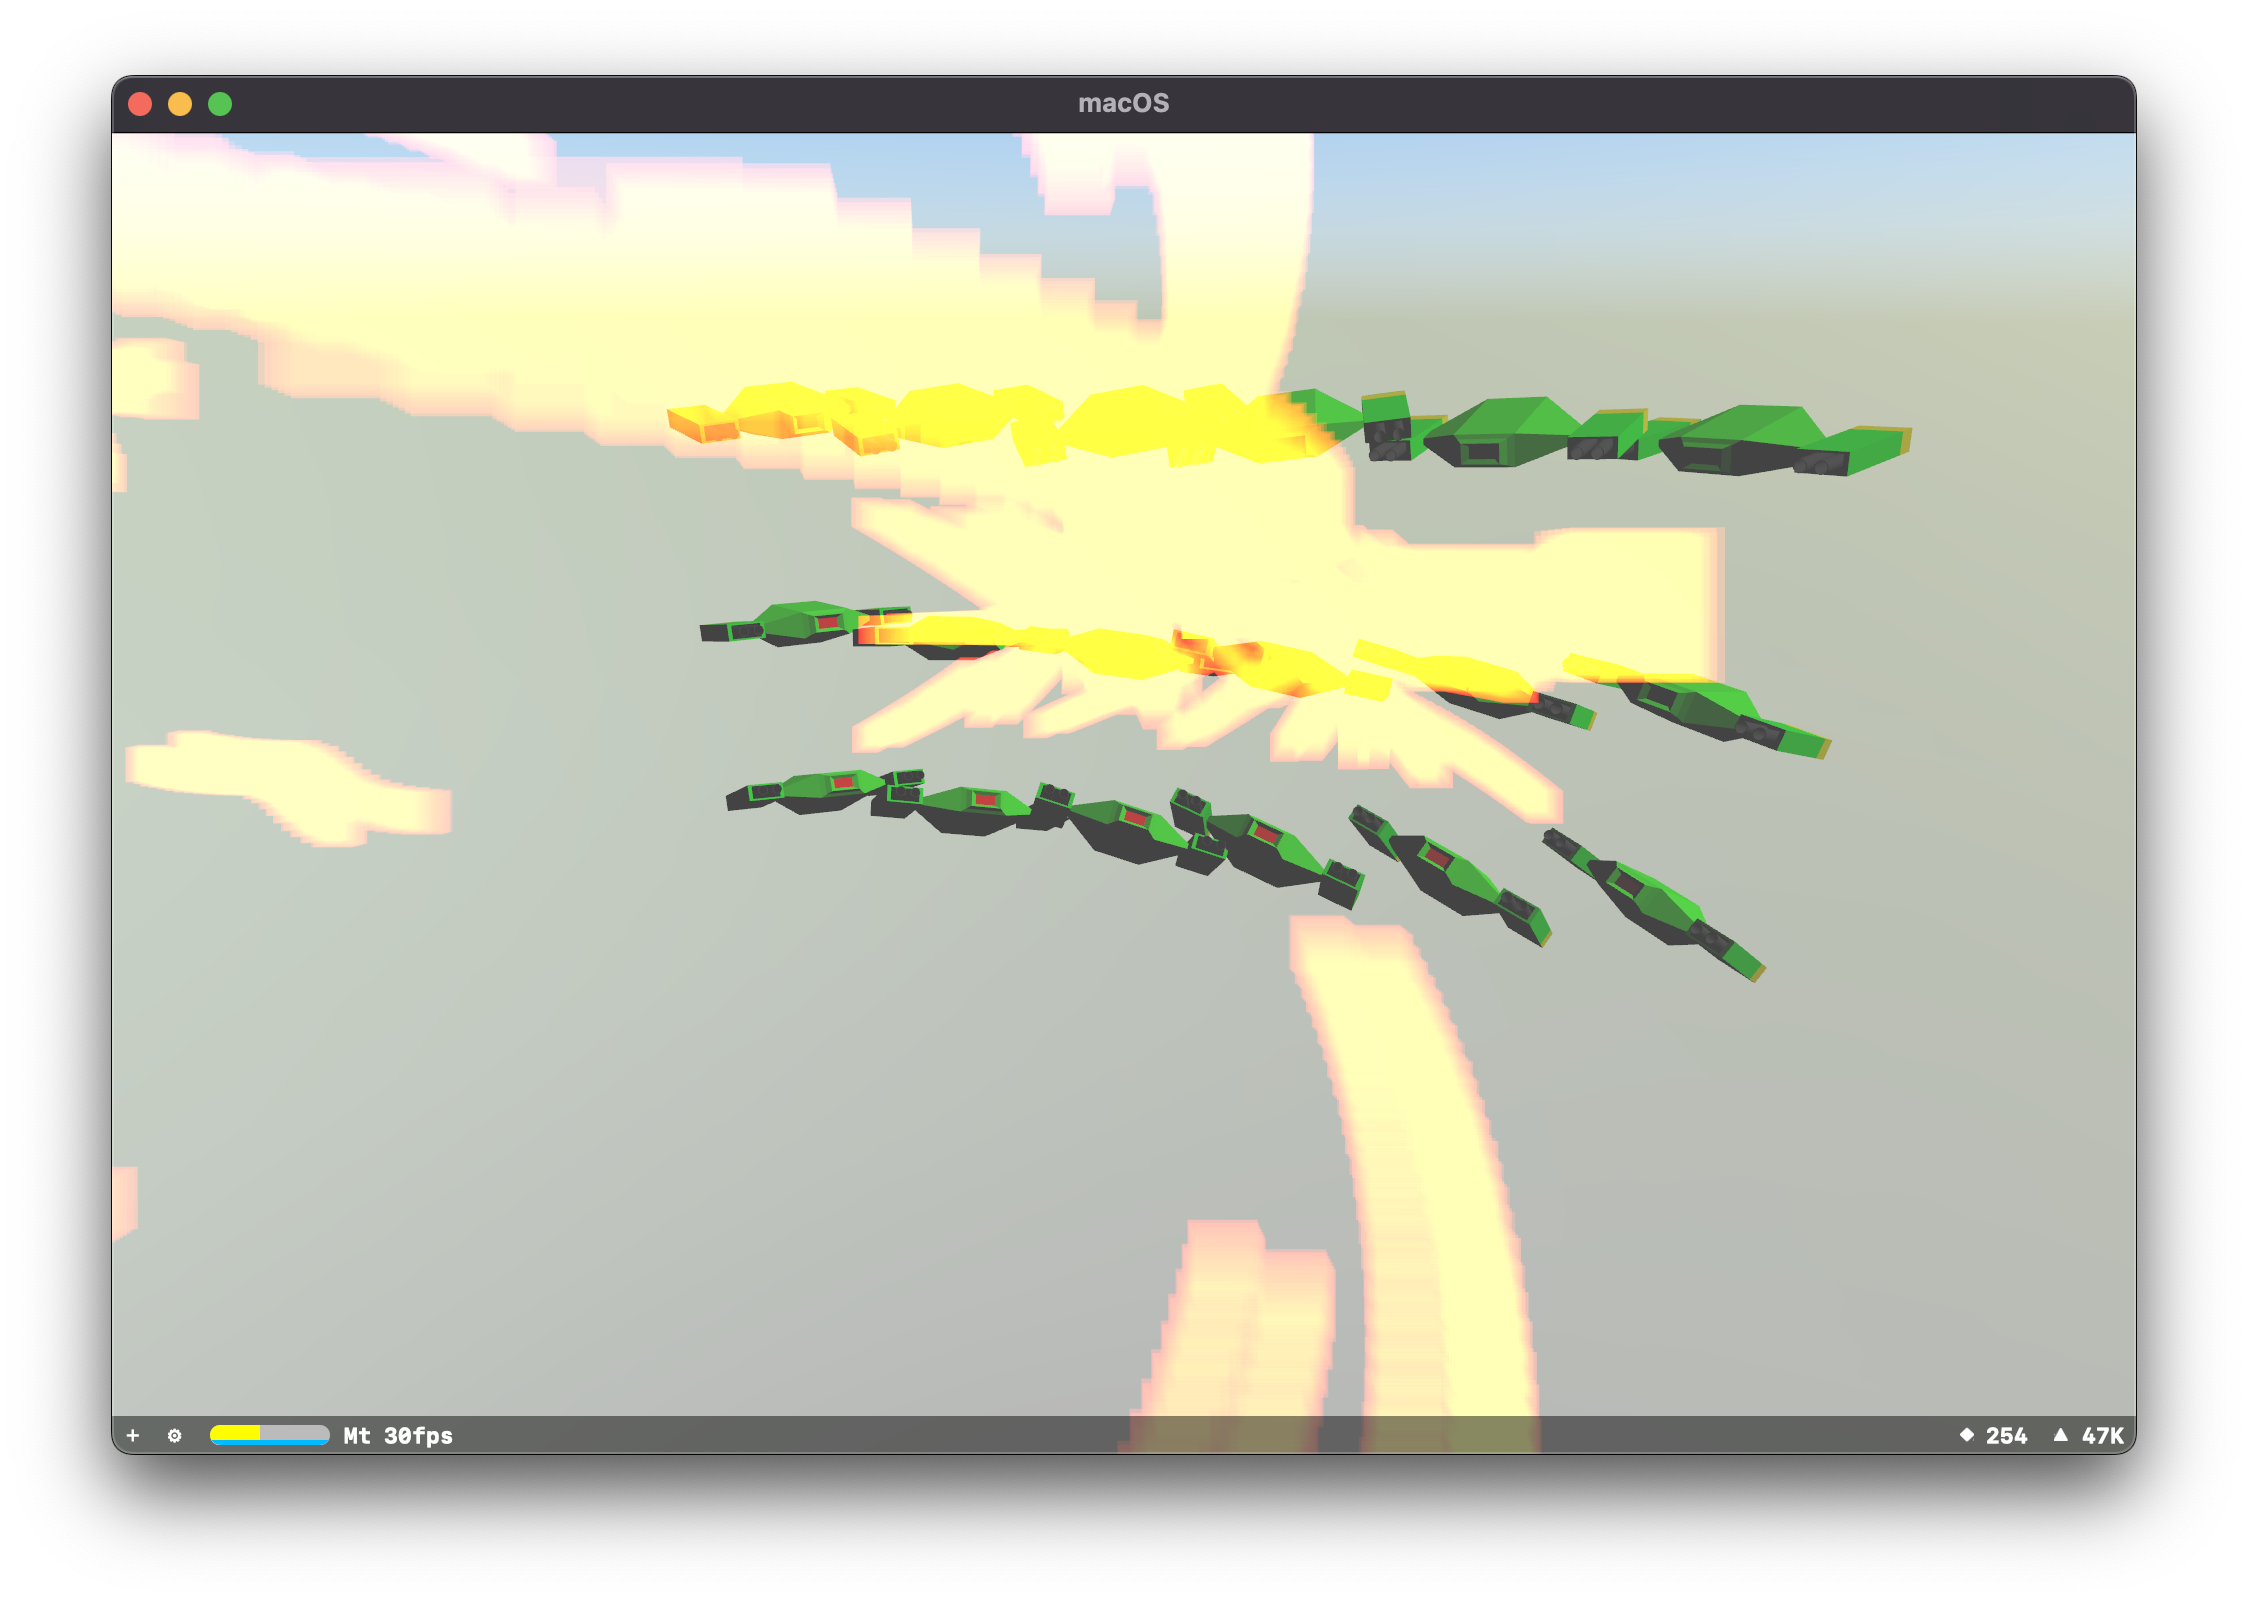 A simple particle systems test scene in SceneKit, feautring many green Marten models, rotated and firing towards where a white sphere was